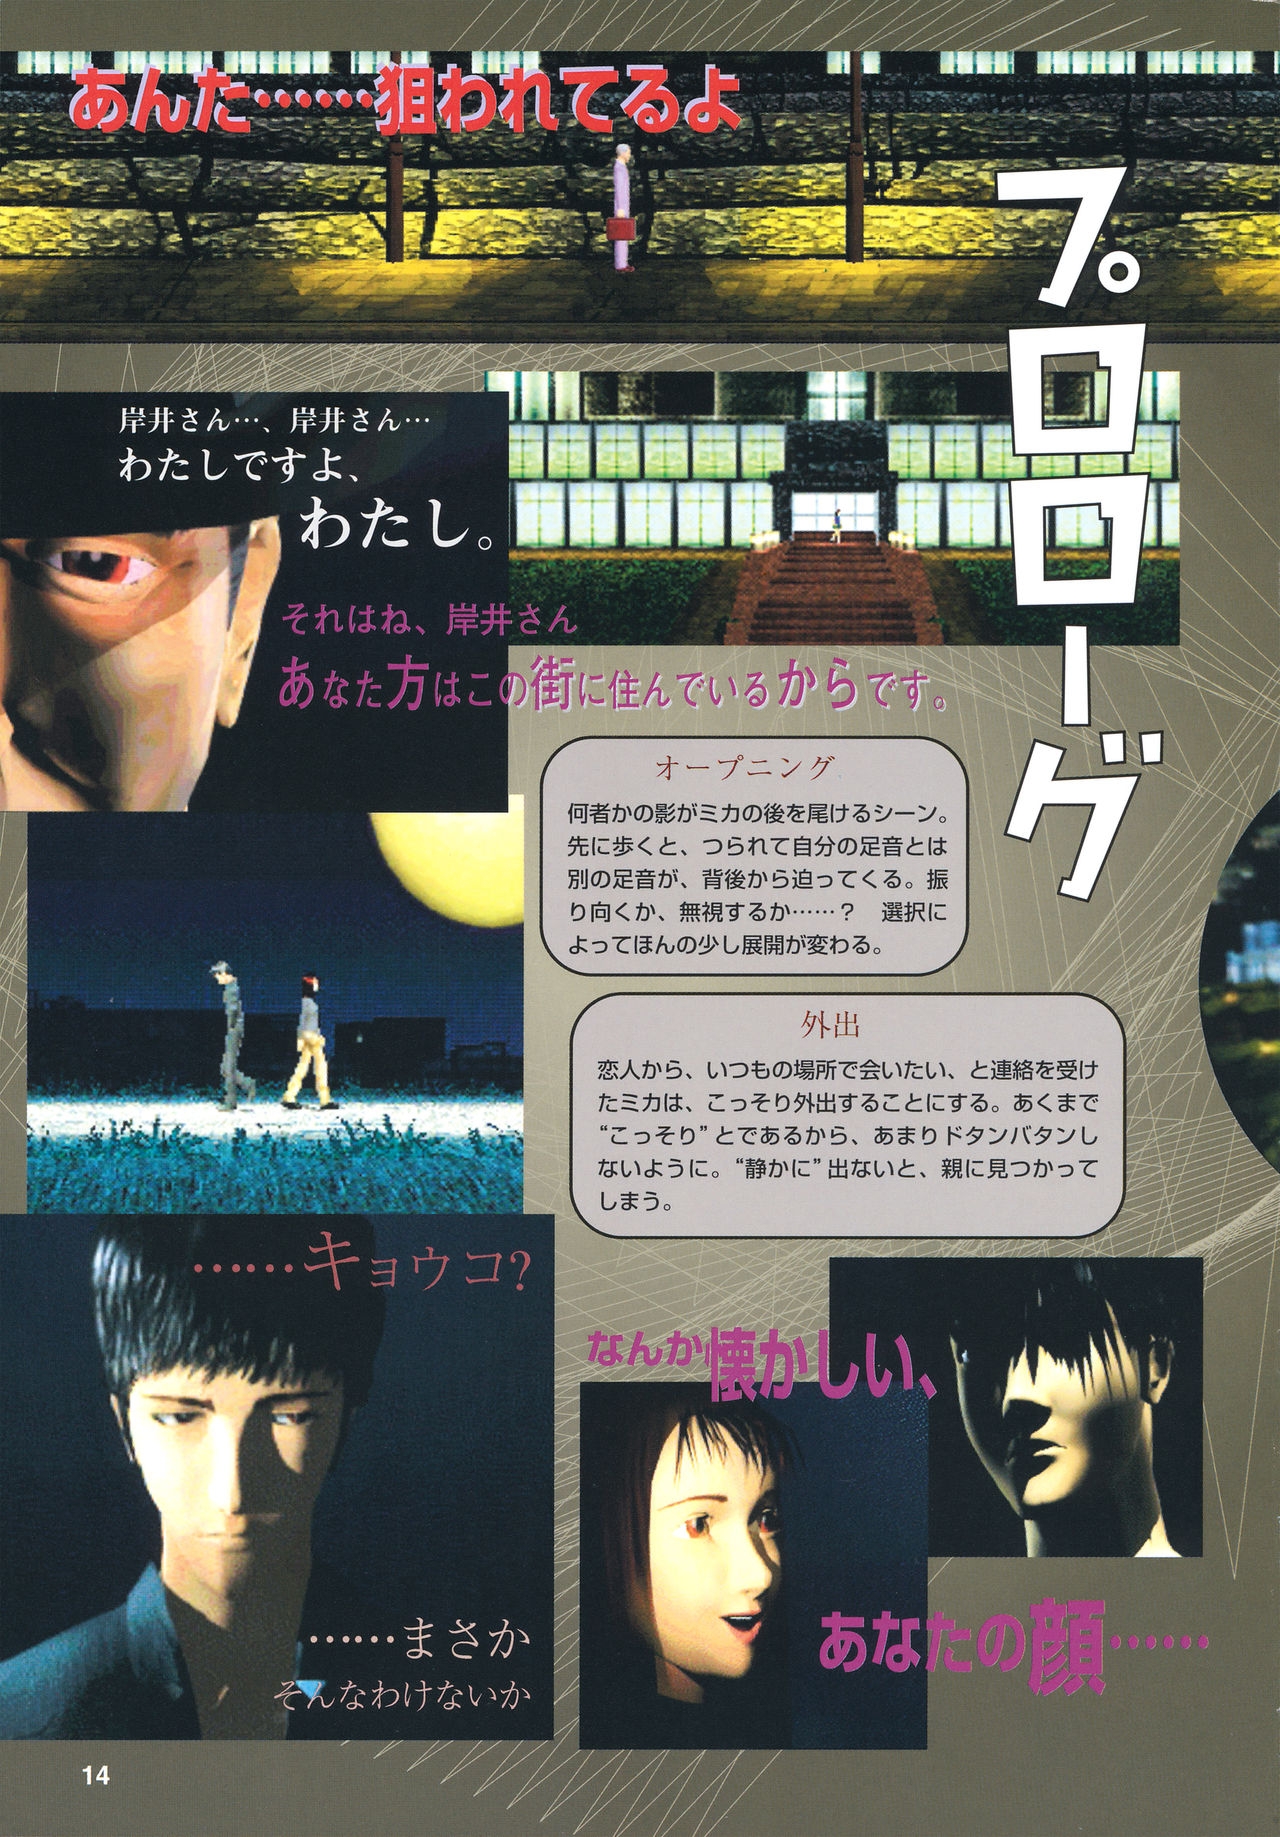 Moonlight Syndrome Visual Guidebook 15